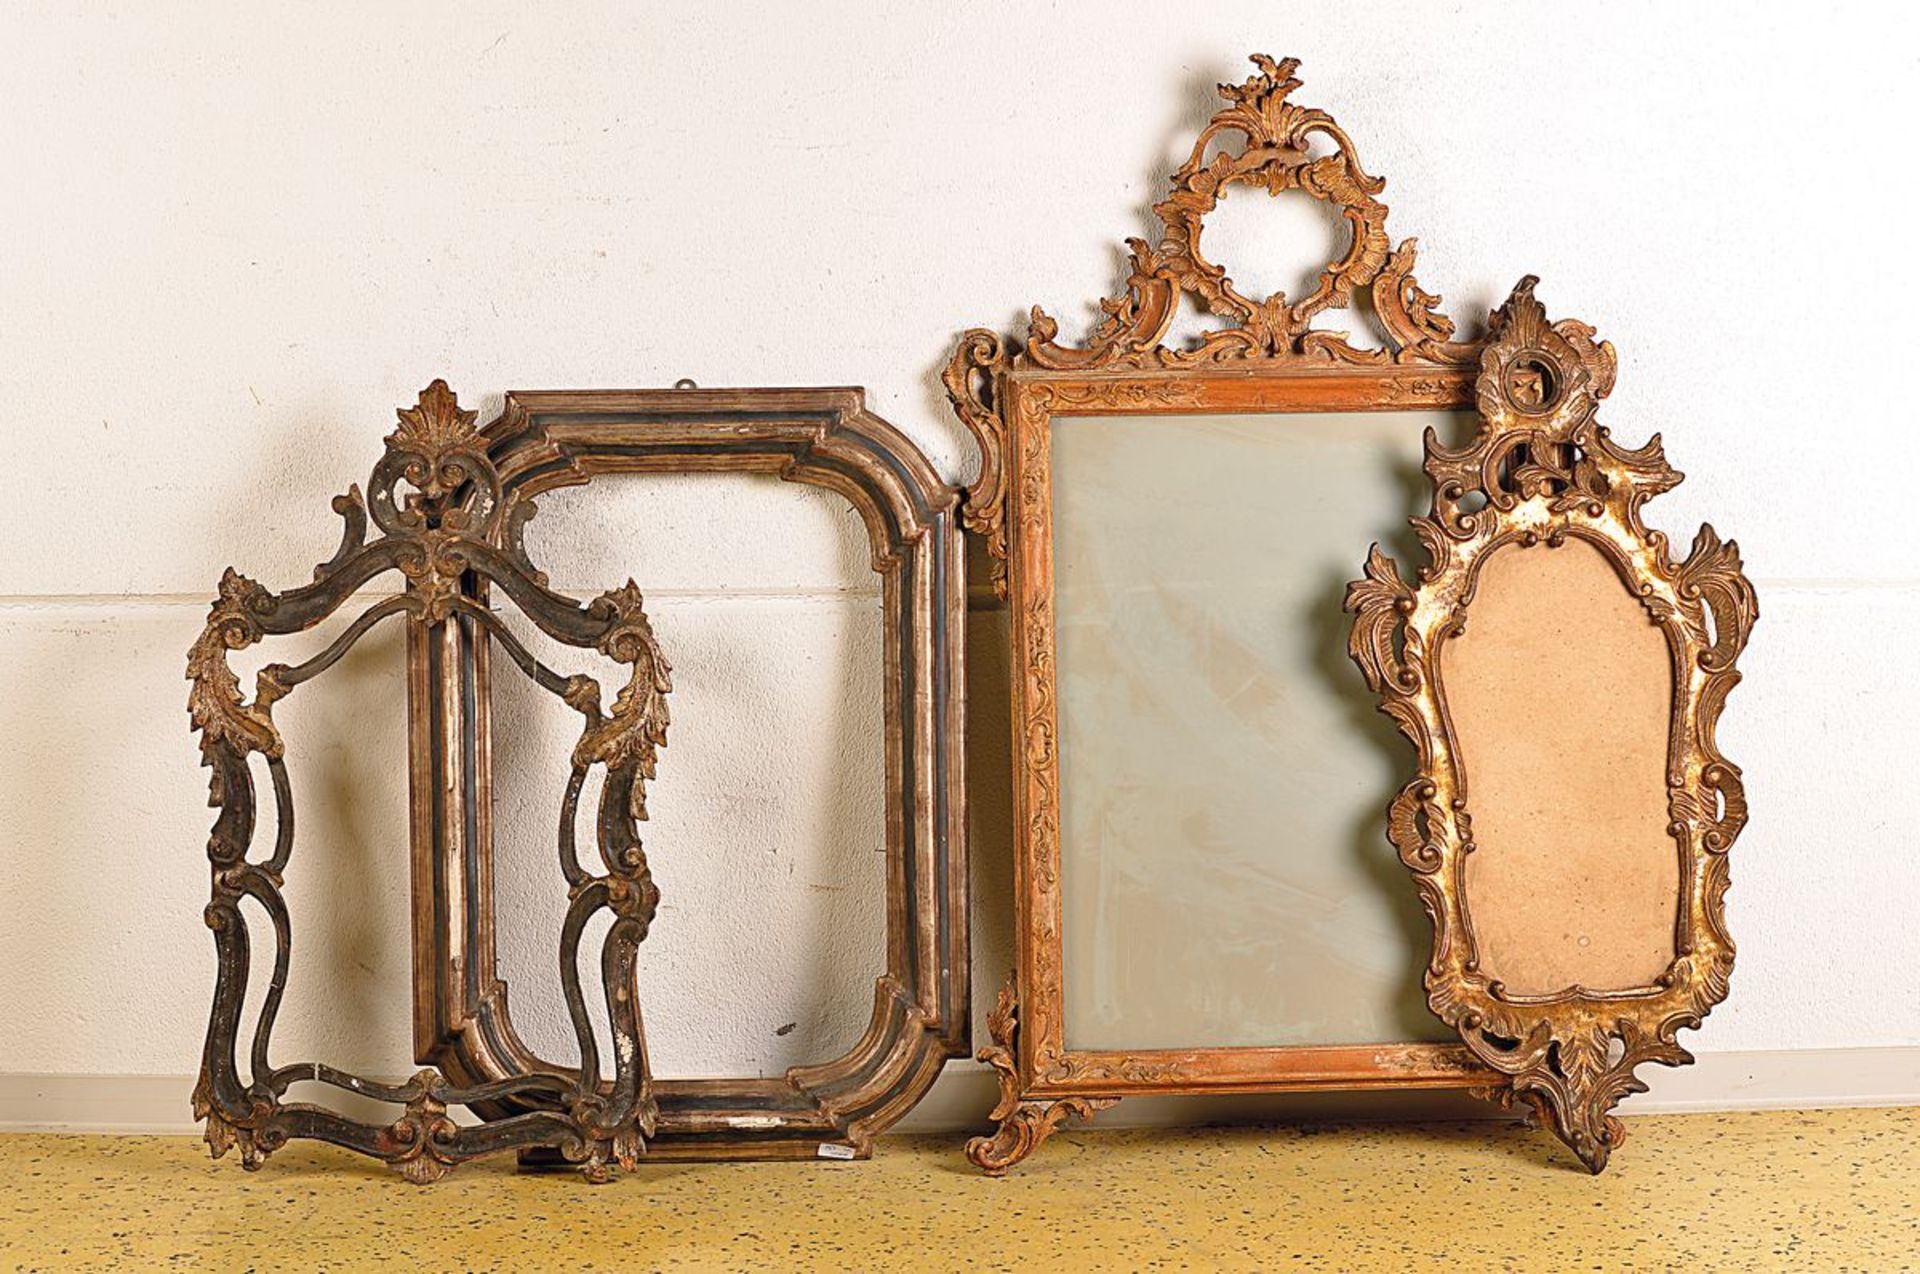 convolute of 4 frames, German and Italian, around 1880-1920, in Baroque- or Renaissance style,